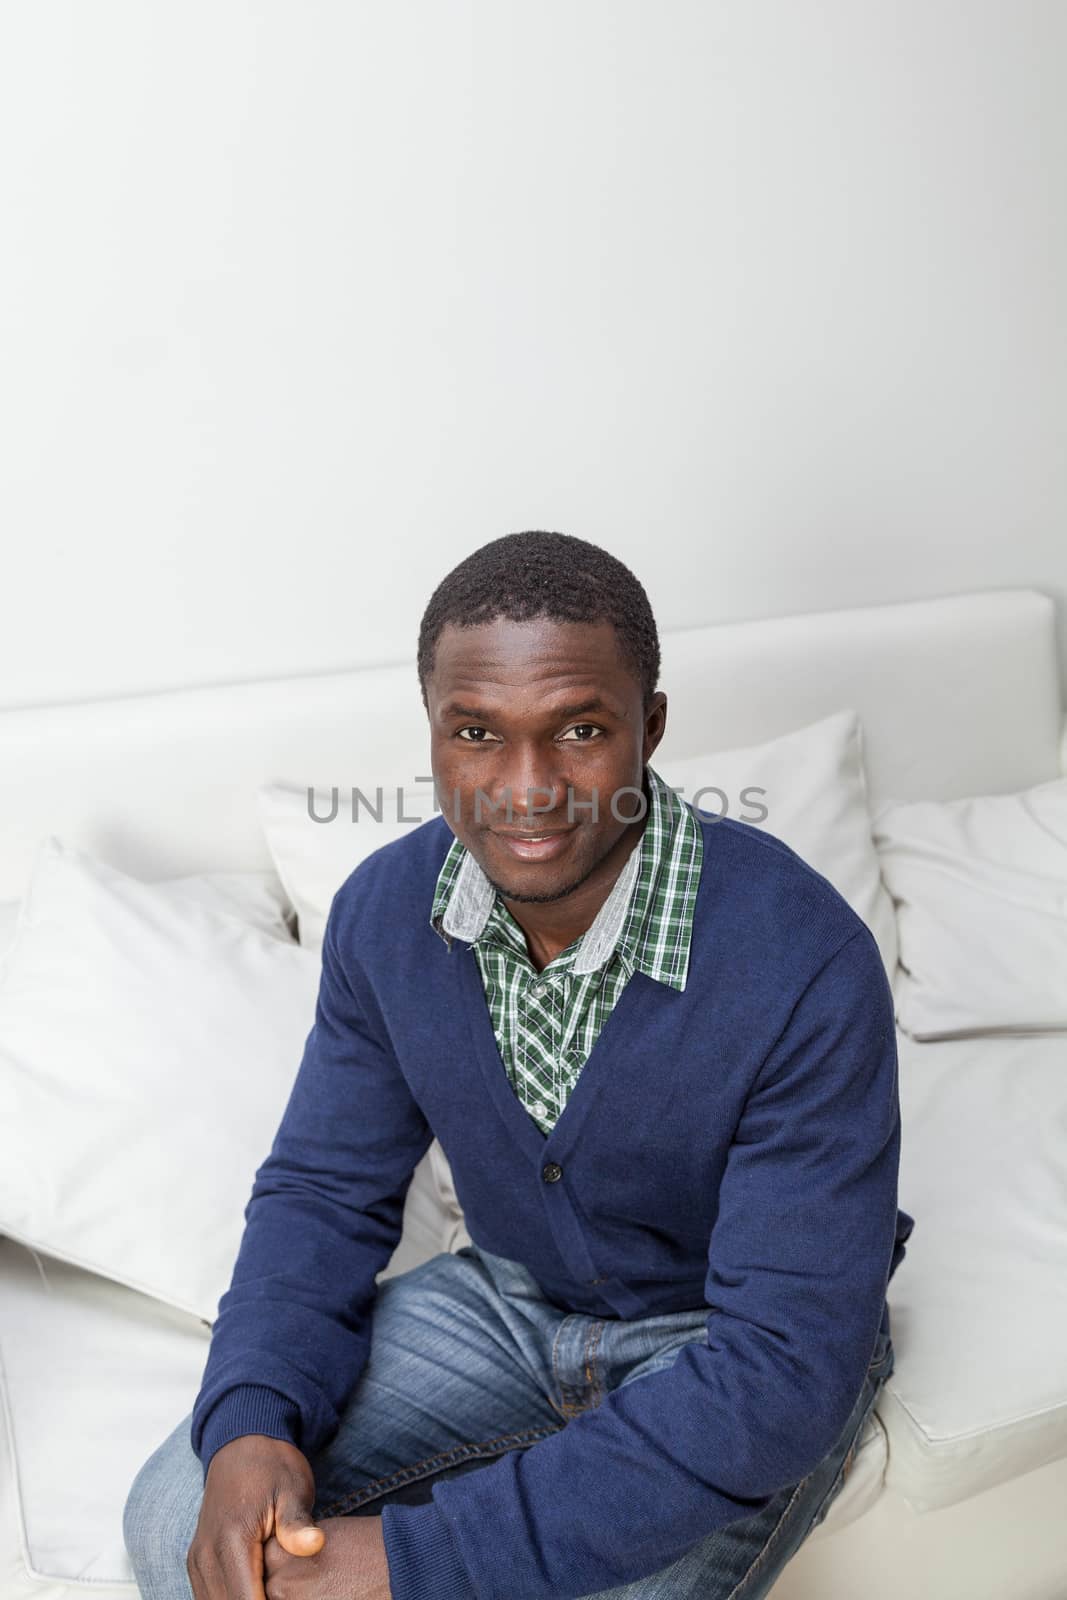 30-35, adult, african, apartment, at, attractive, black, camera, casual, christmas, cute, festive, festivity, front, happy, holidays, home, homey, house, household, inside, joyful, leisure, life, living, looking, male, man, model, old, one, person, portrait, pretty, property, releases, room, sit, sitting, smiling, sofa, sweater, time, vertical, years